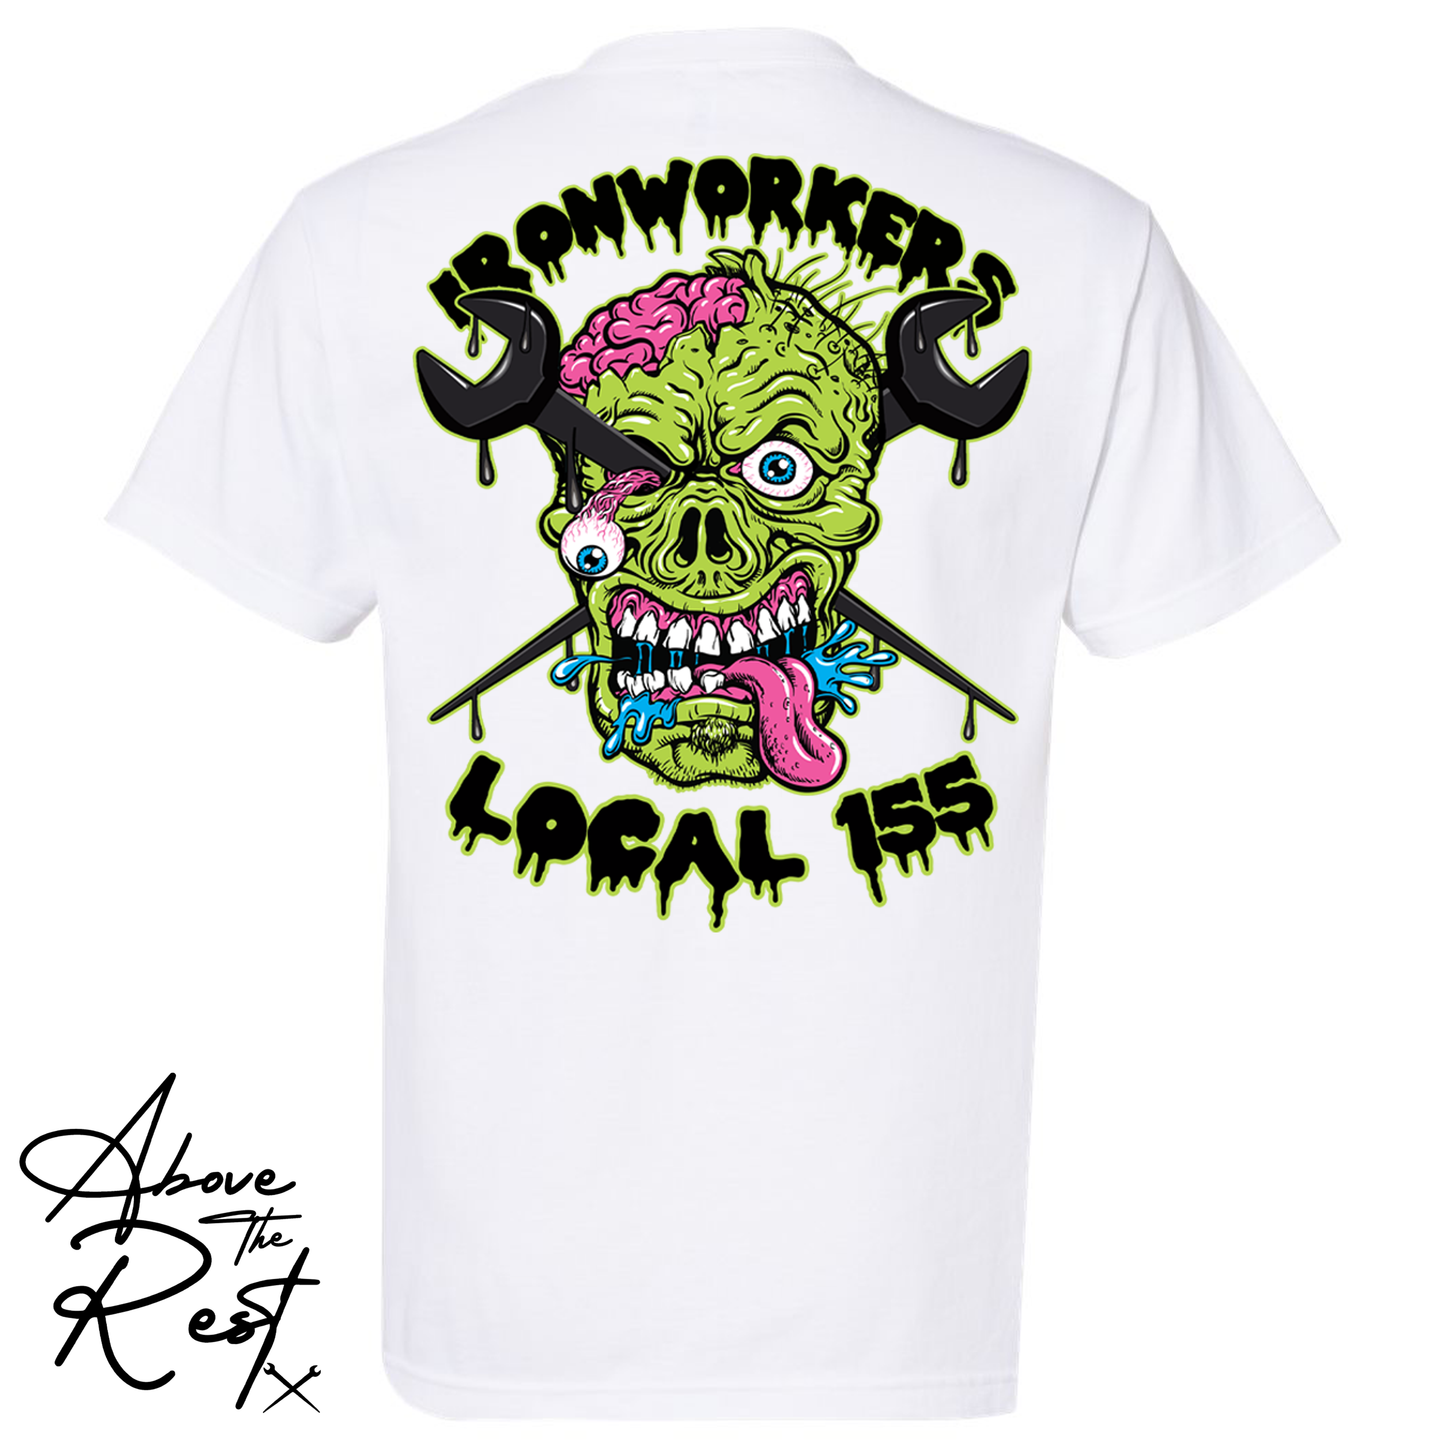 IW ZOMBIE LOCAL 155 T-SHIRT